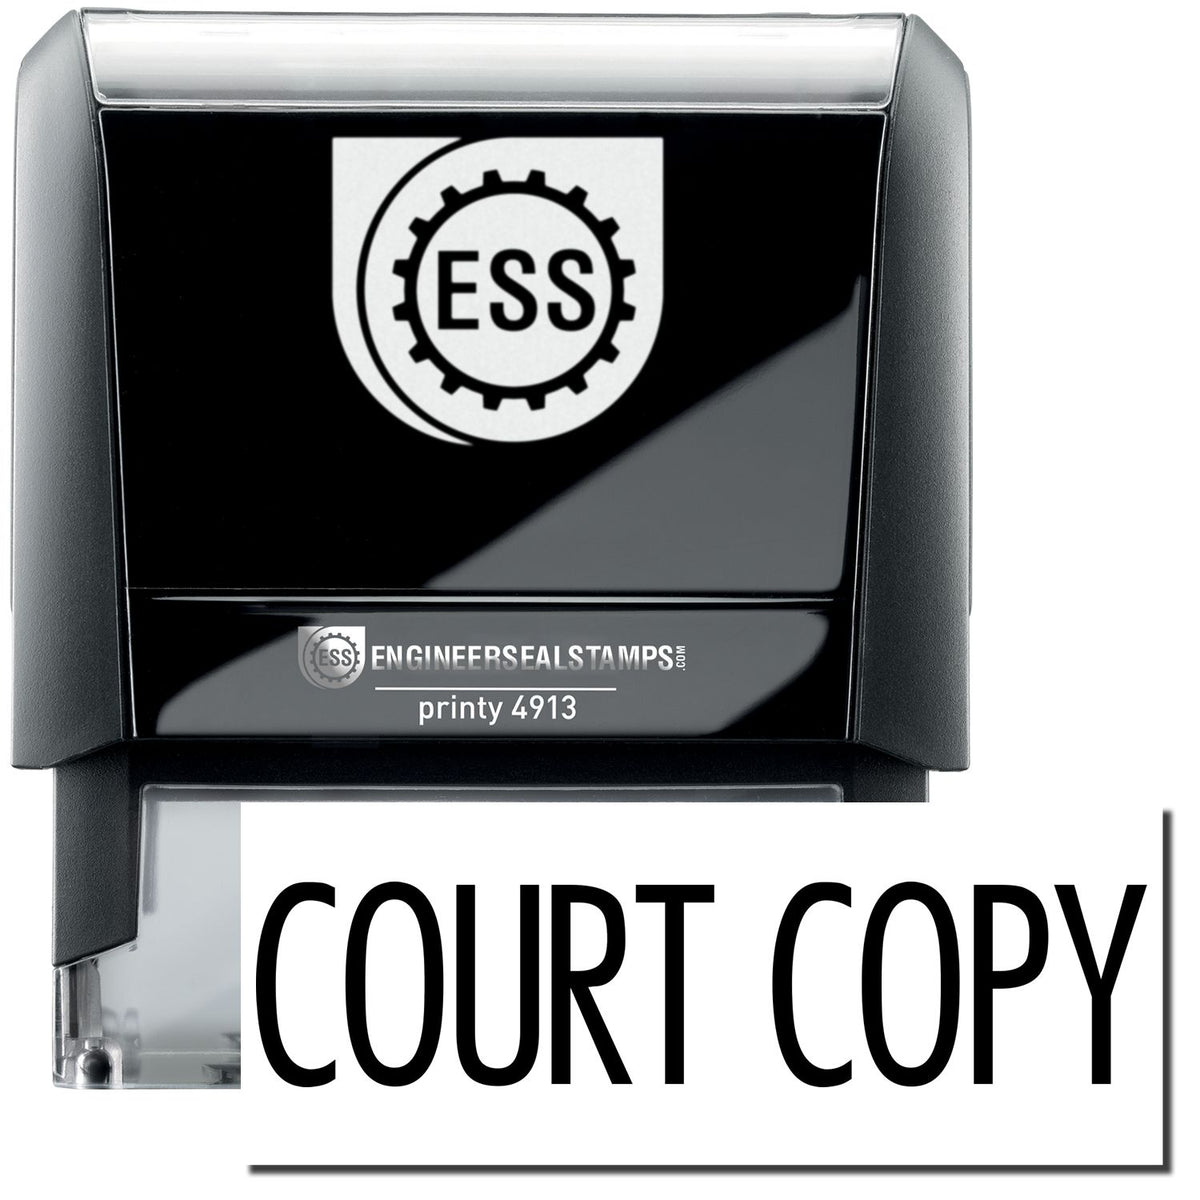 A self-inking stamp with a stamped image showing how the text &quot;COURT COPY&quot; in a large narrow font is displayed by it after stamping.